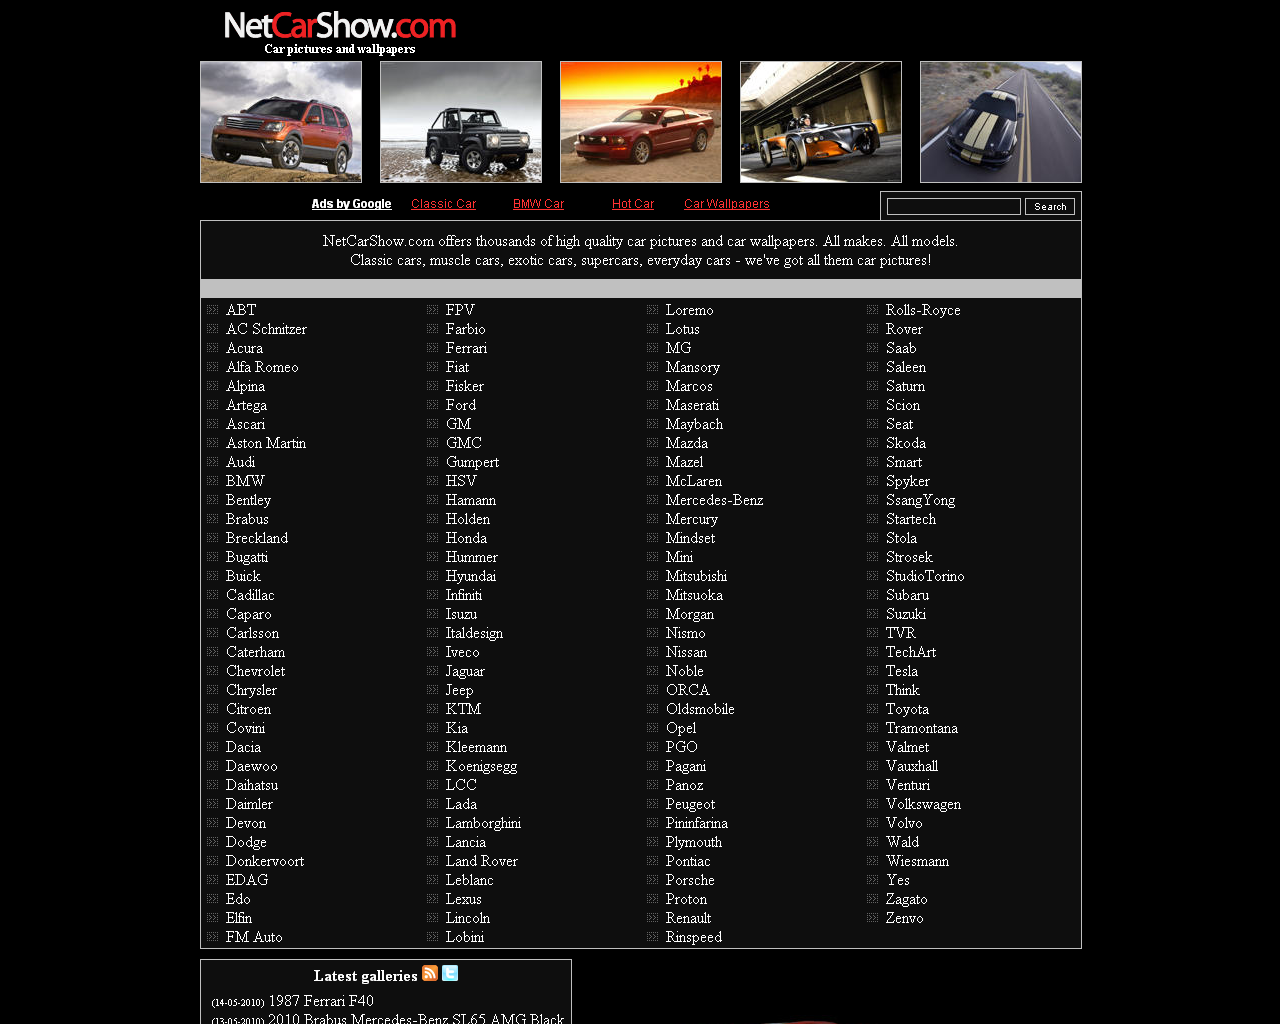 The Net Car Show Homepage